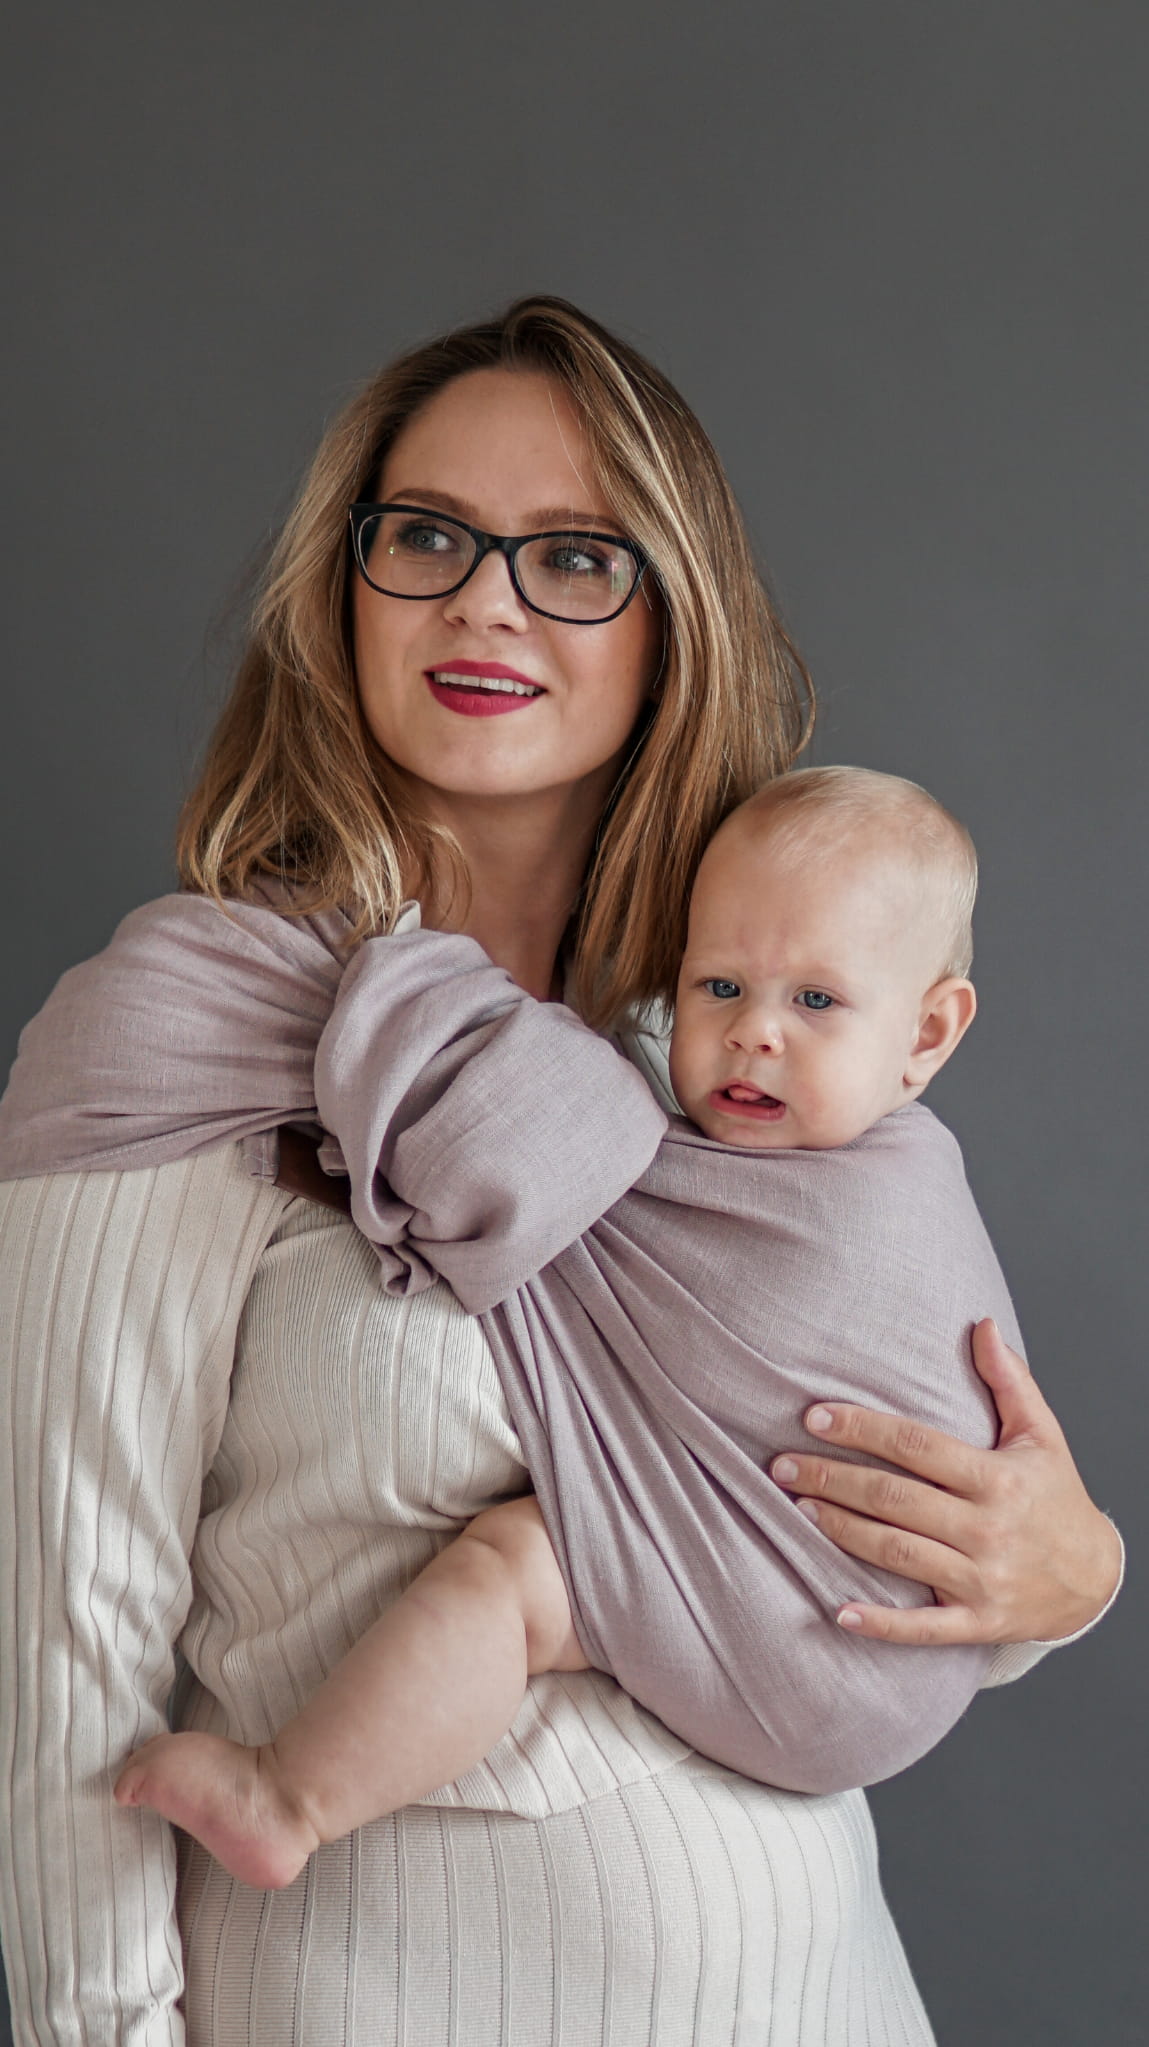 Baba Wrap Ring Sling - Heather 100% linen